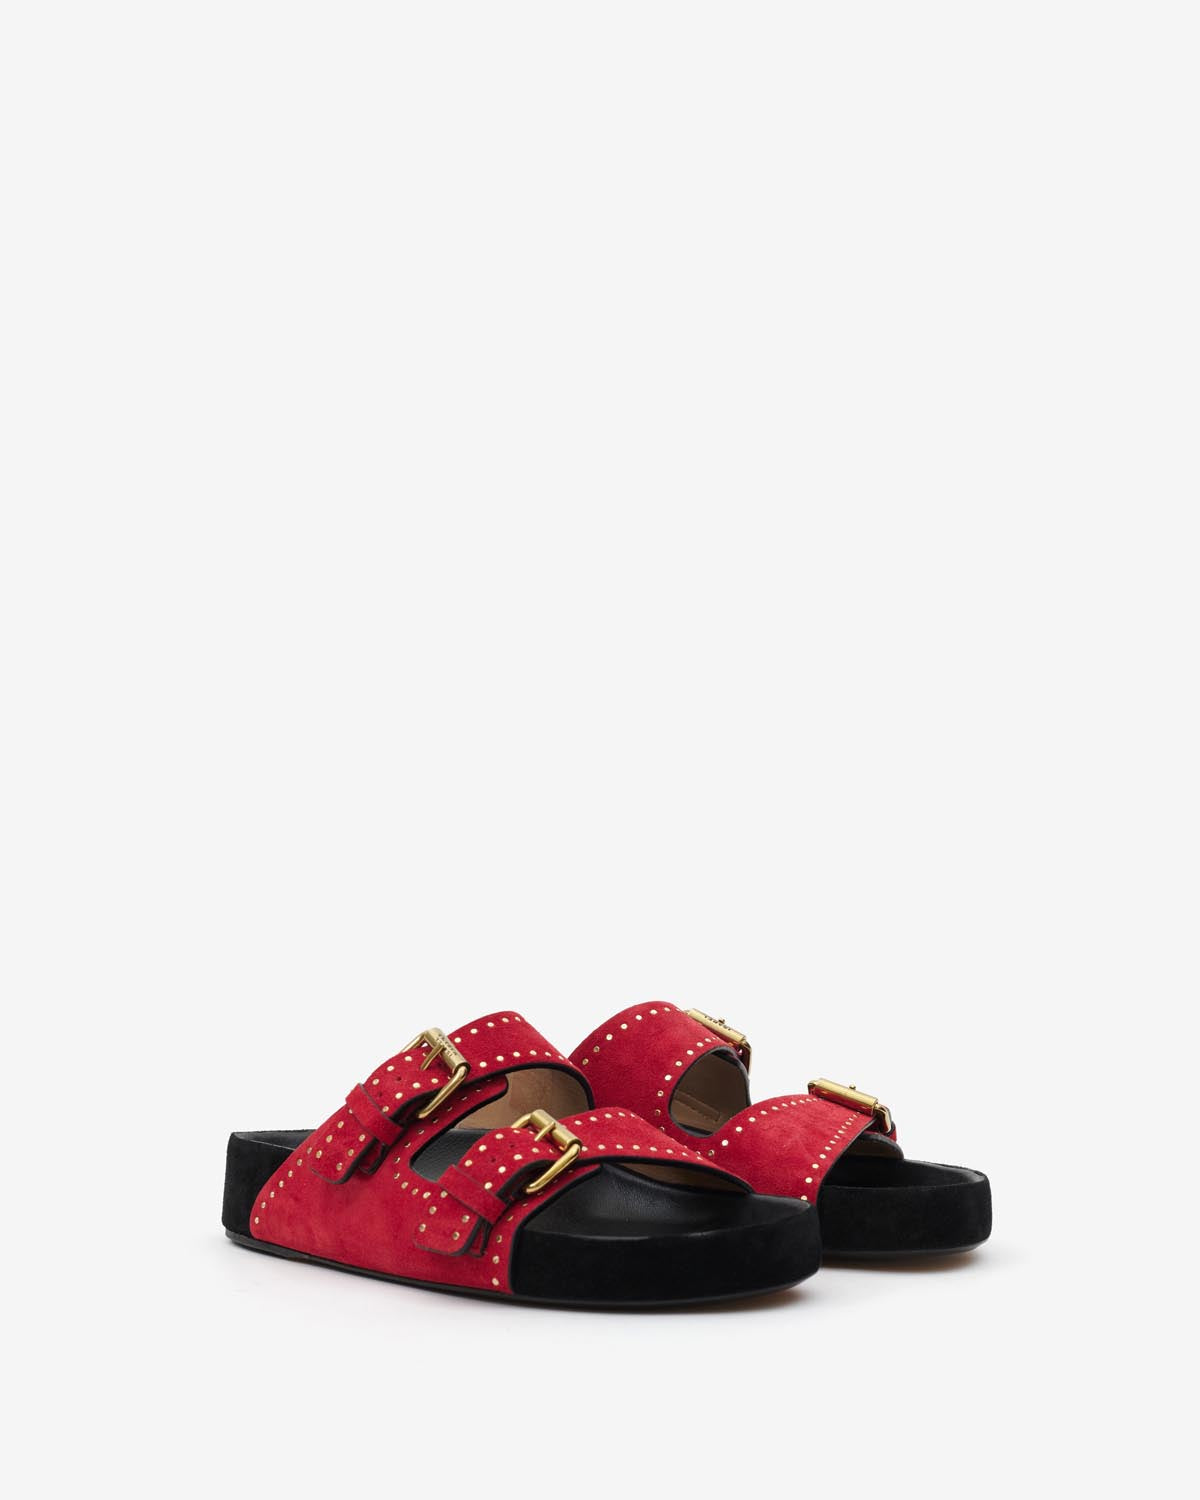 Lennyo sandals Woman Scarlet red 5